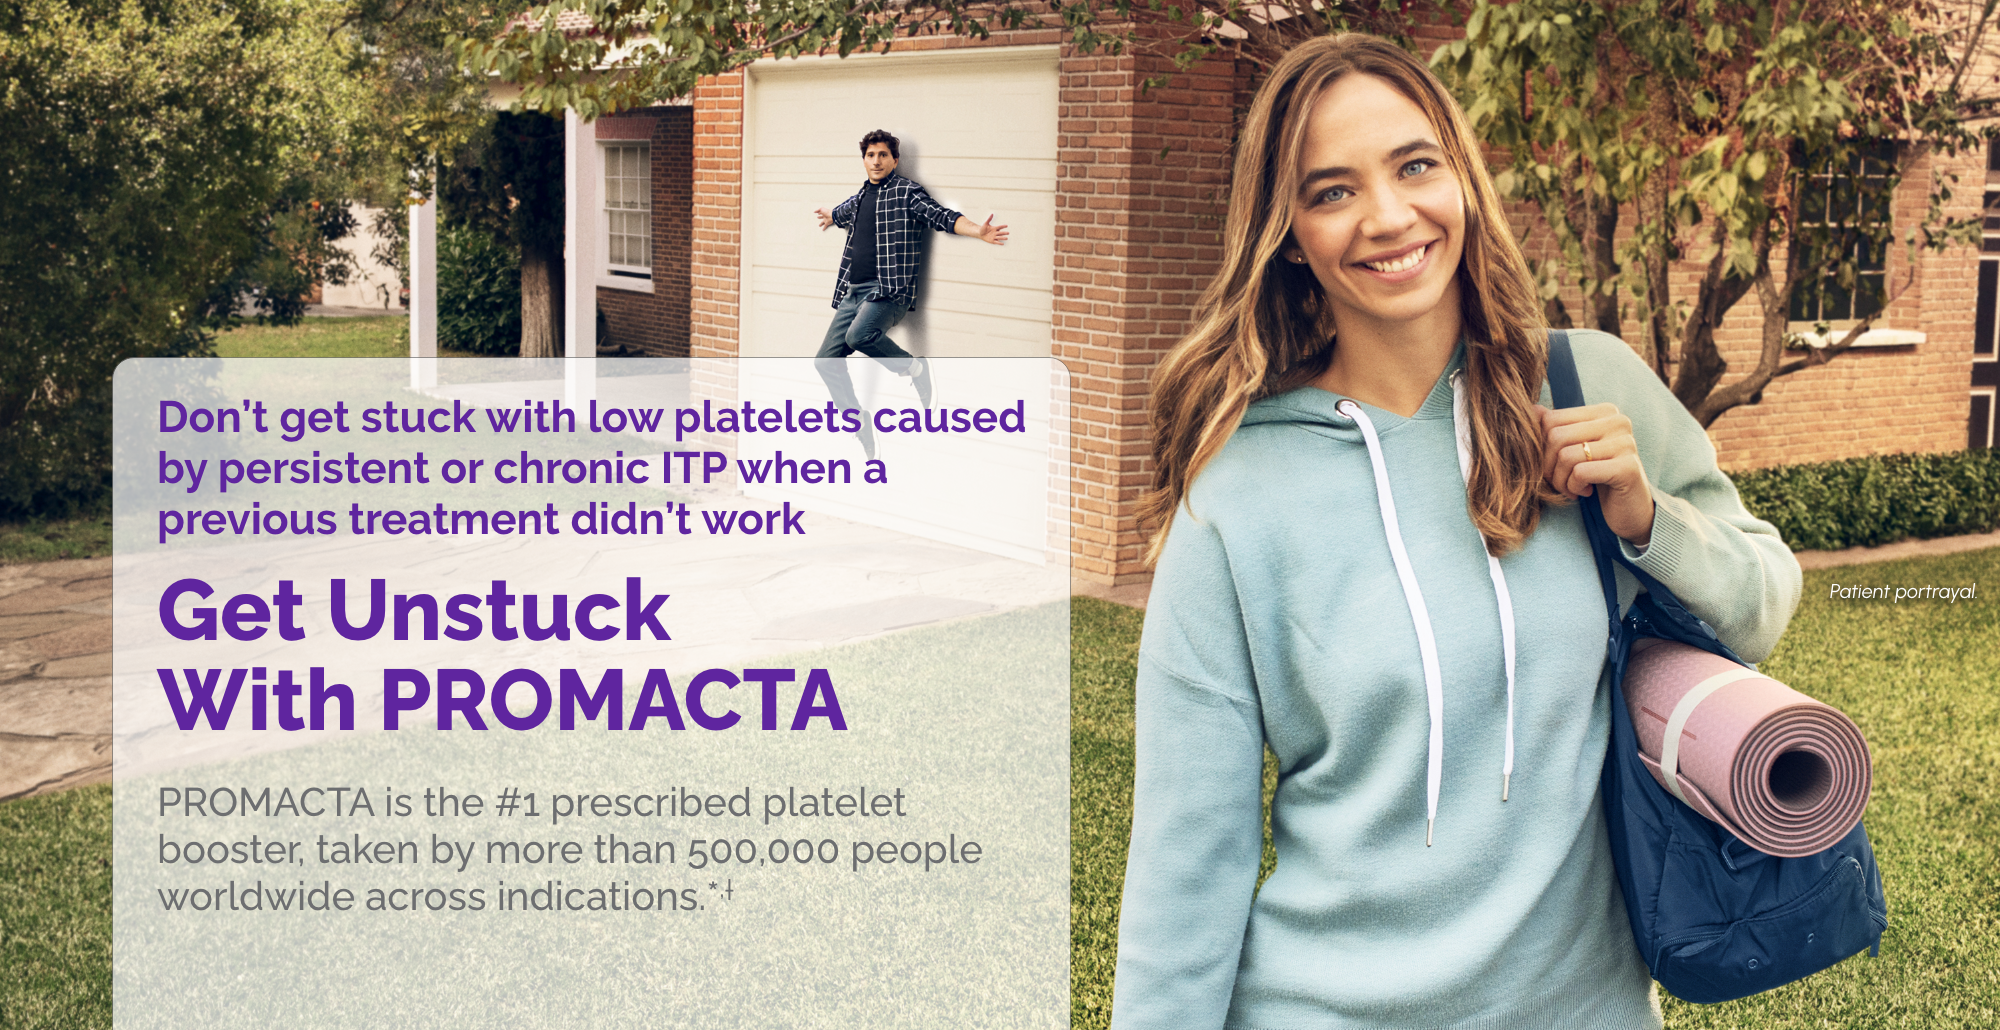 Image of empowered women with text stating "Get Unstuck With PROMACTA"